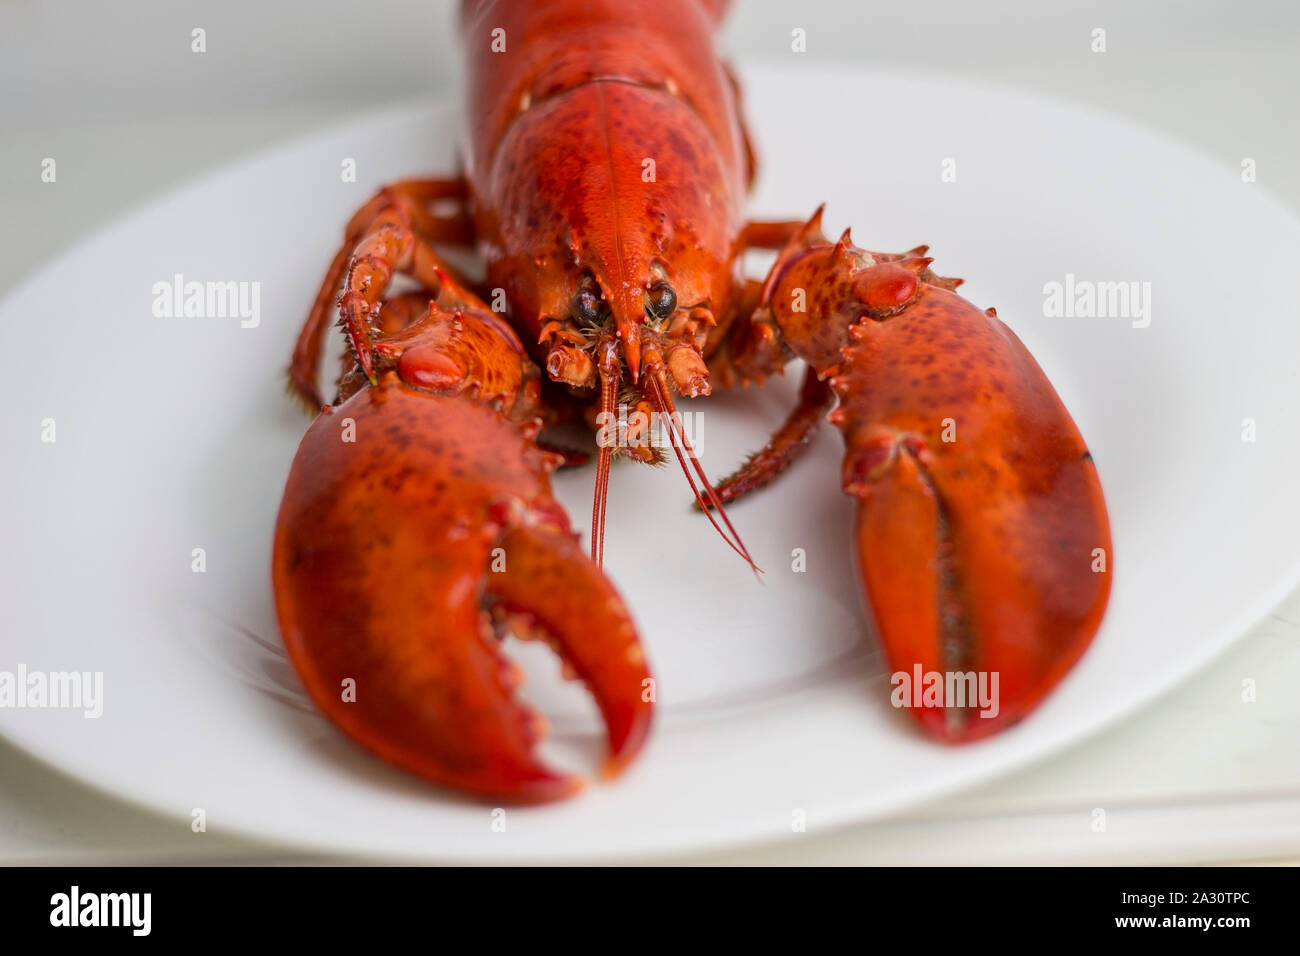 Whole red lobster ready to eat. Stock Photo